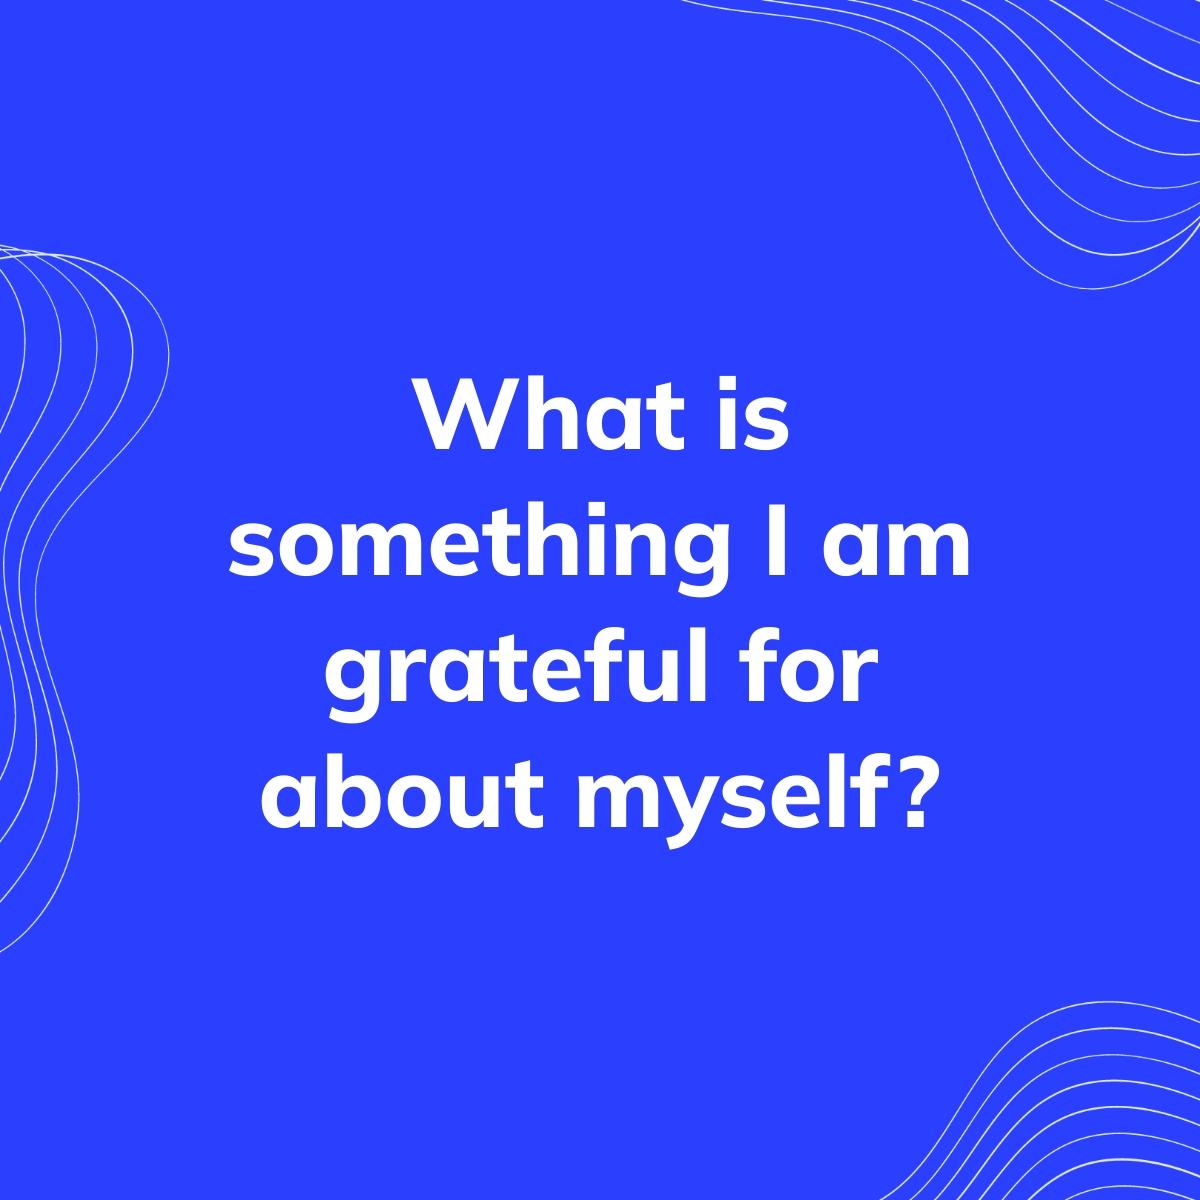 Journal Prompt: What is something I am grateful for about myself?